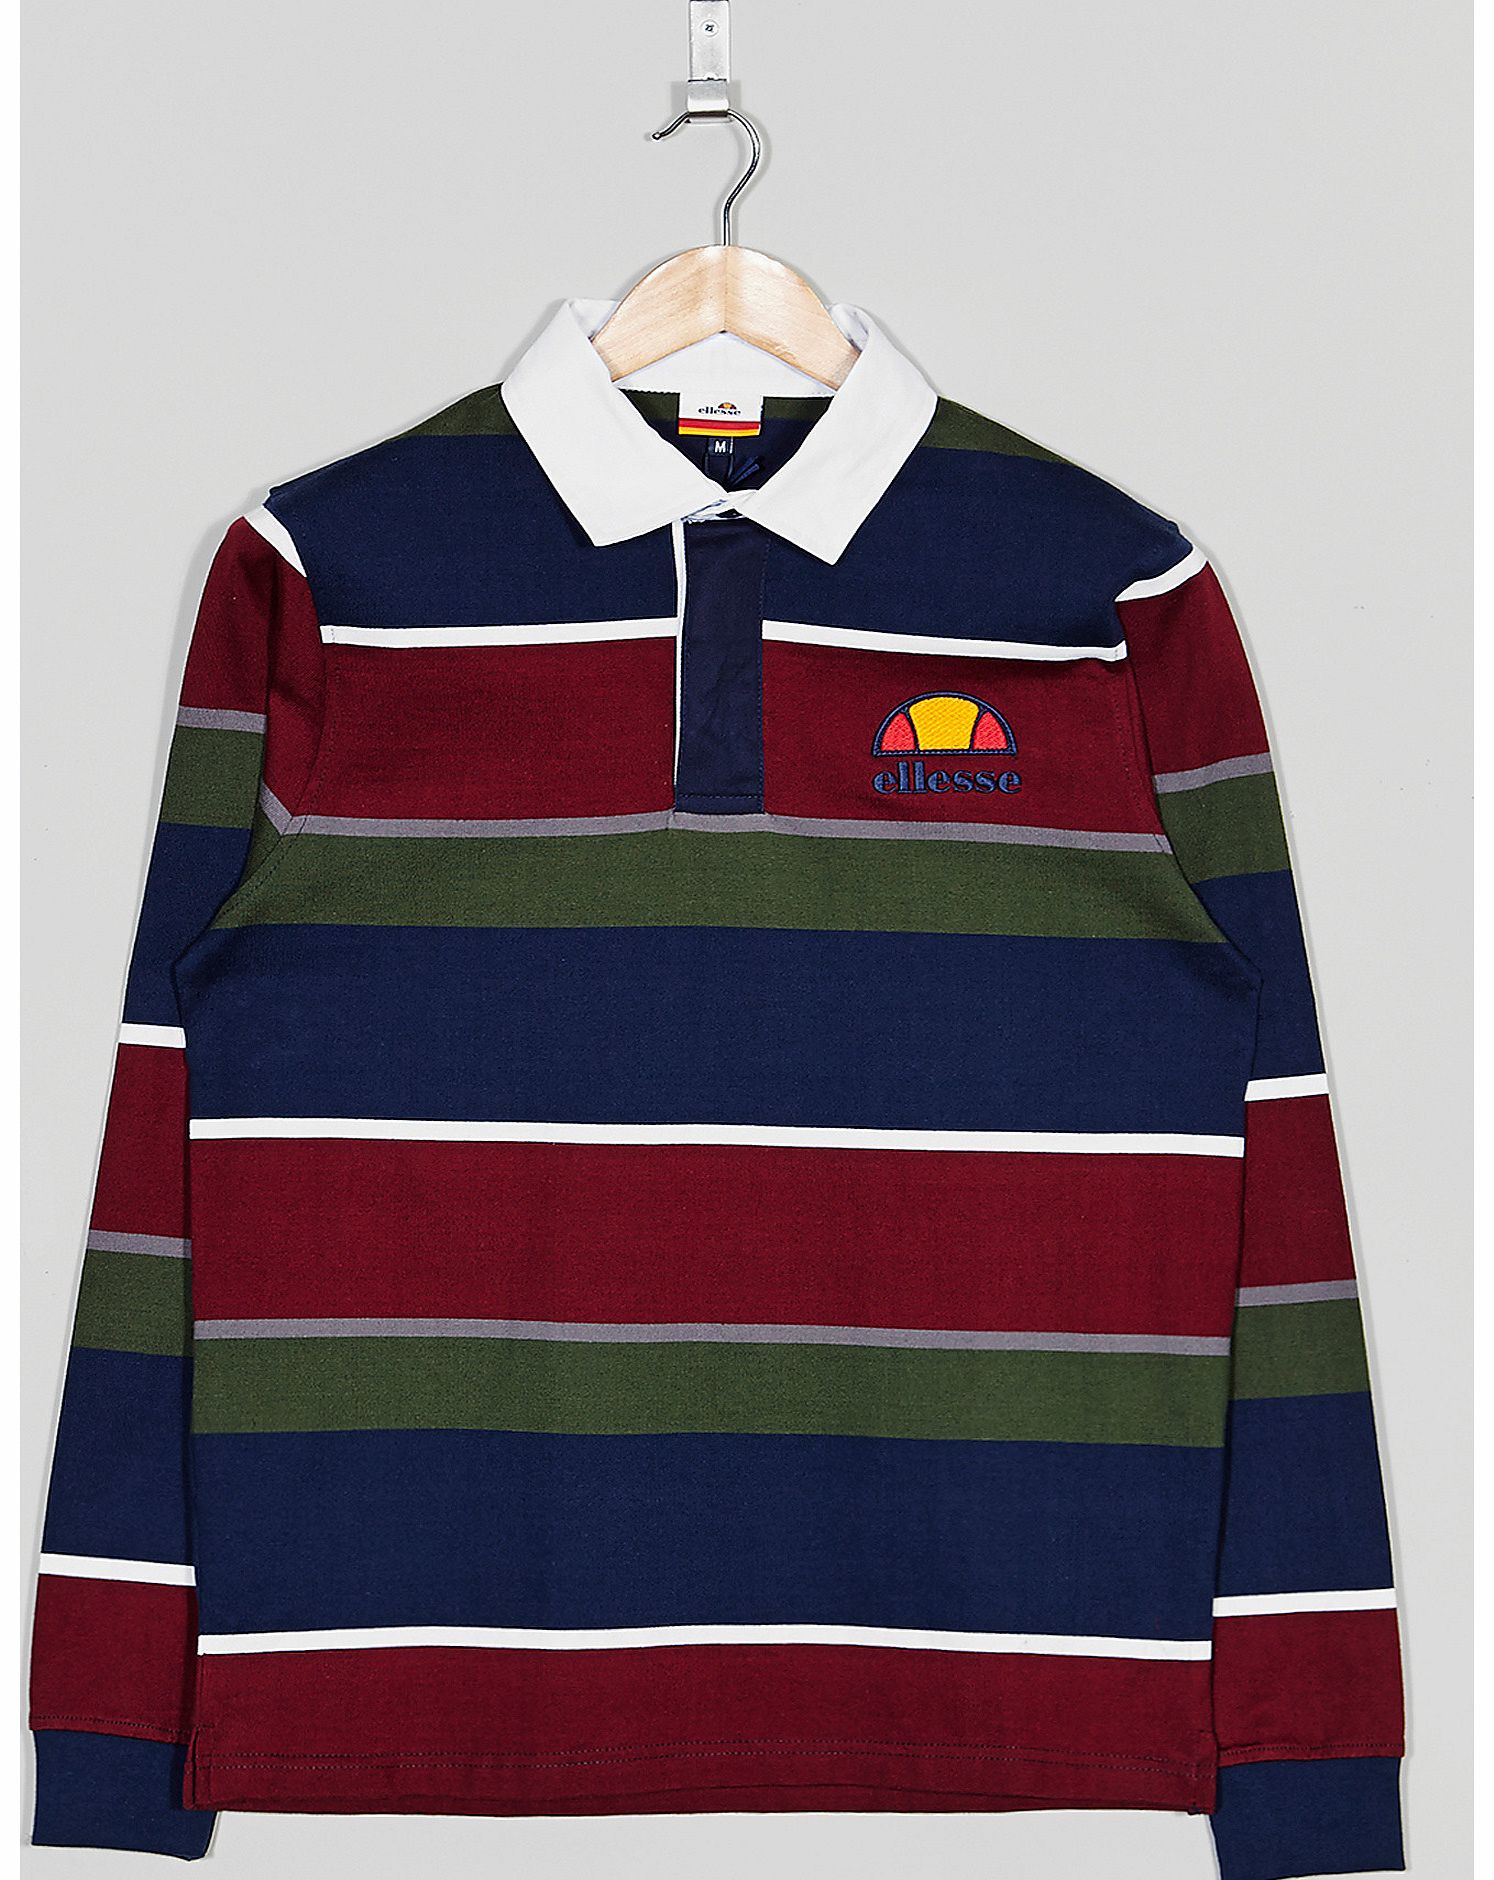 Parisse Striped Rugby Shirt - size?